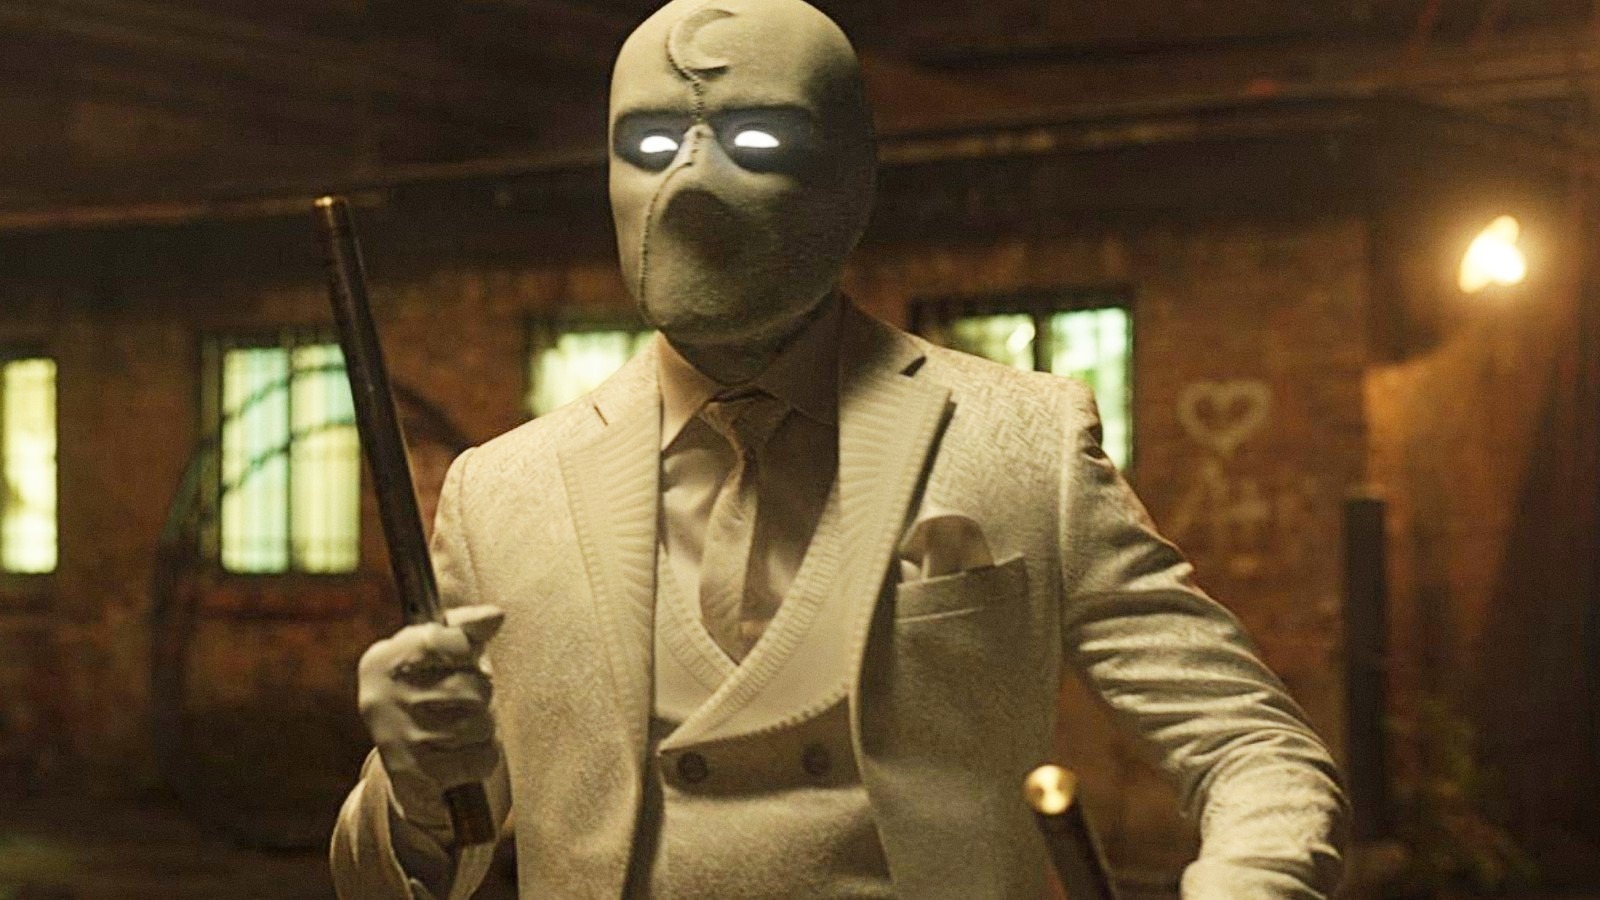 #5 Other Shows To Watch If You Like Moon Knight